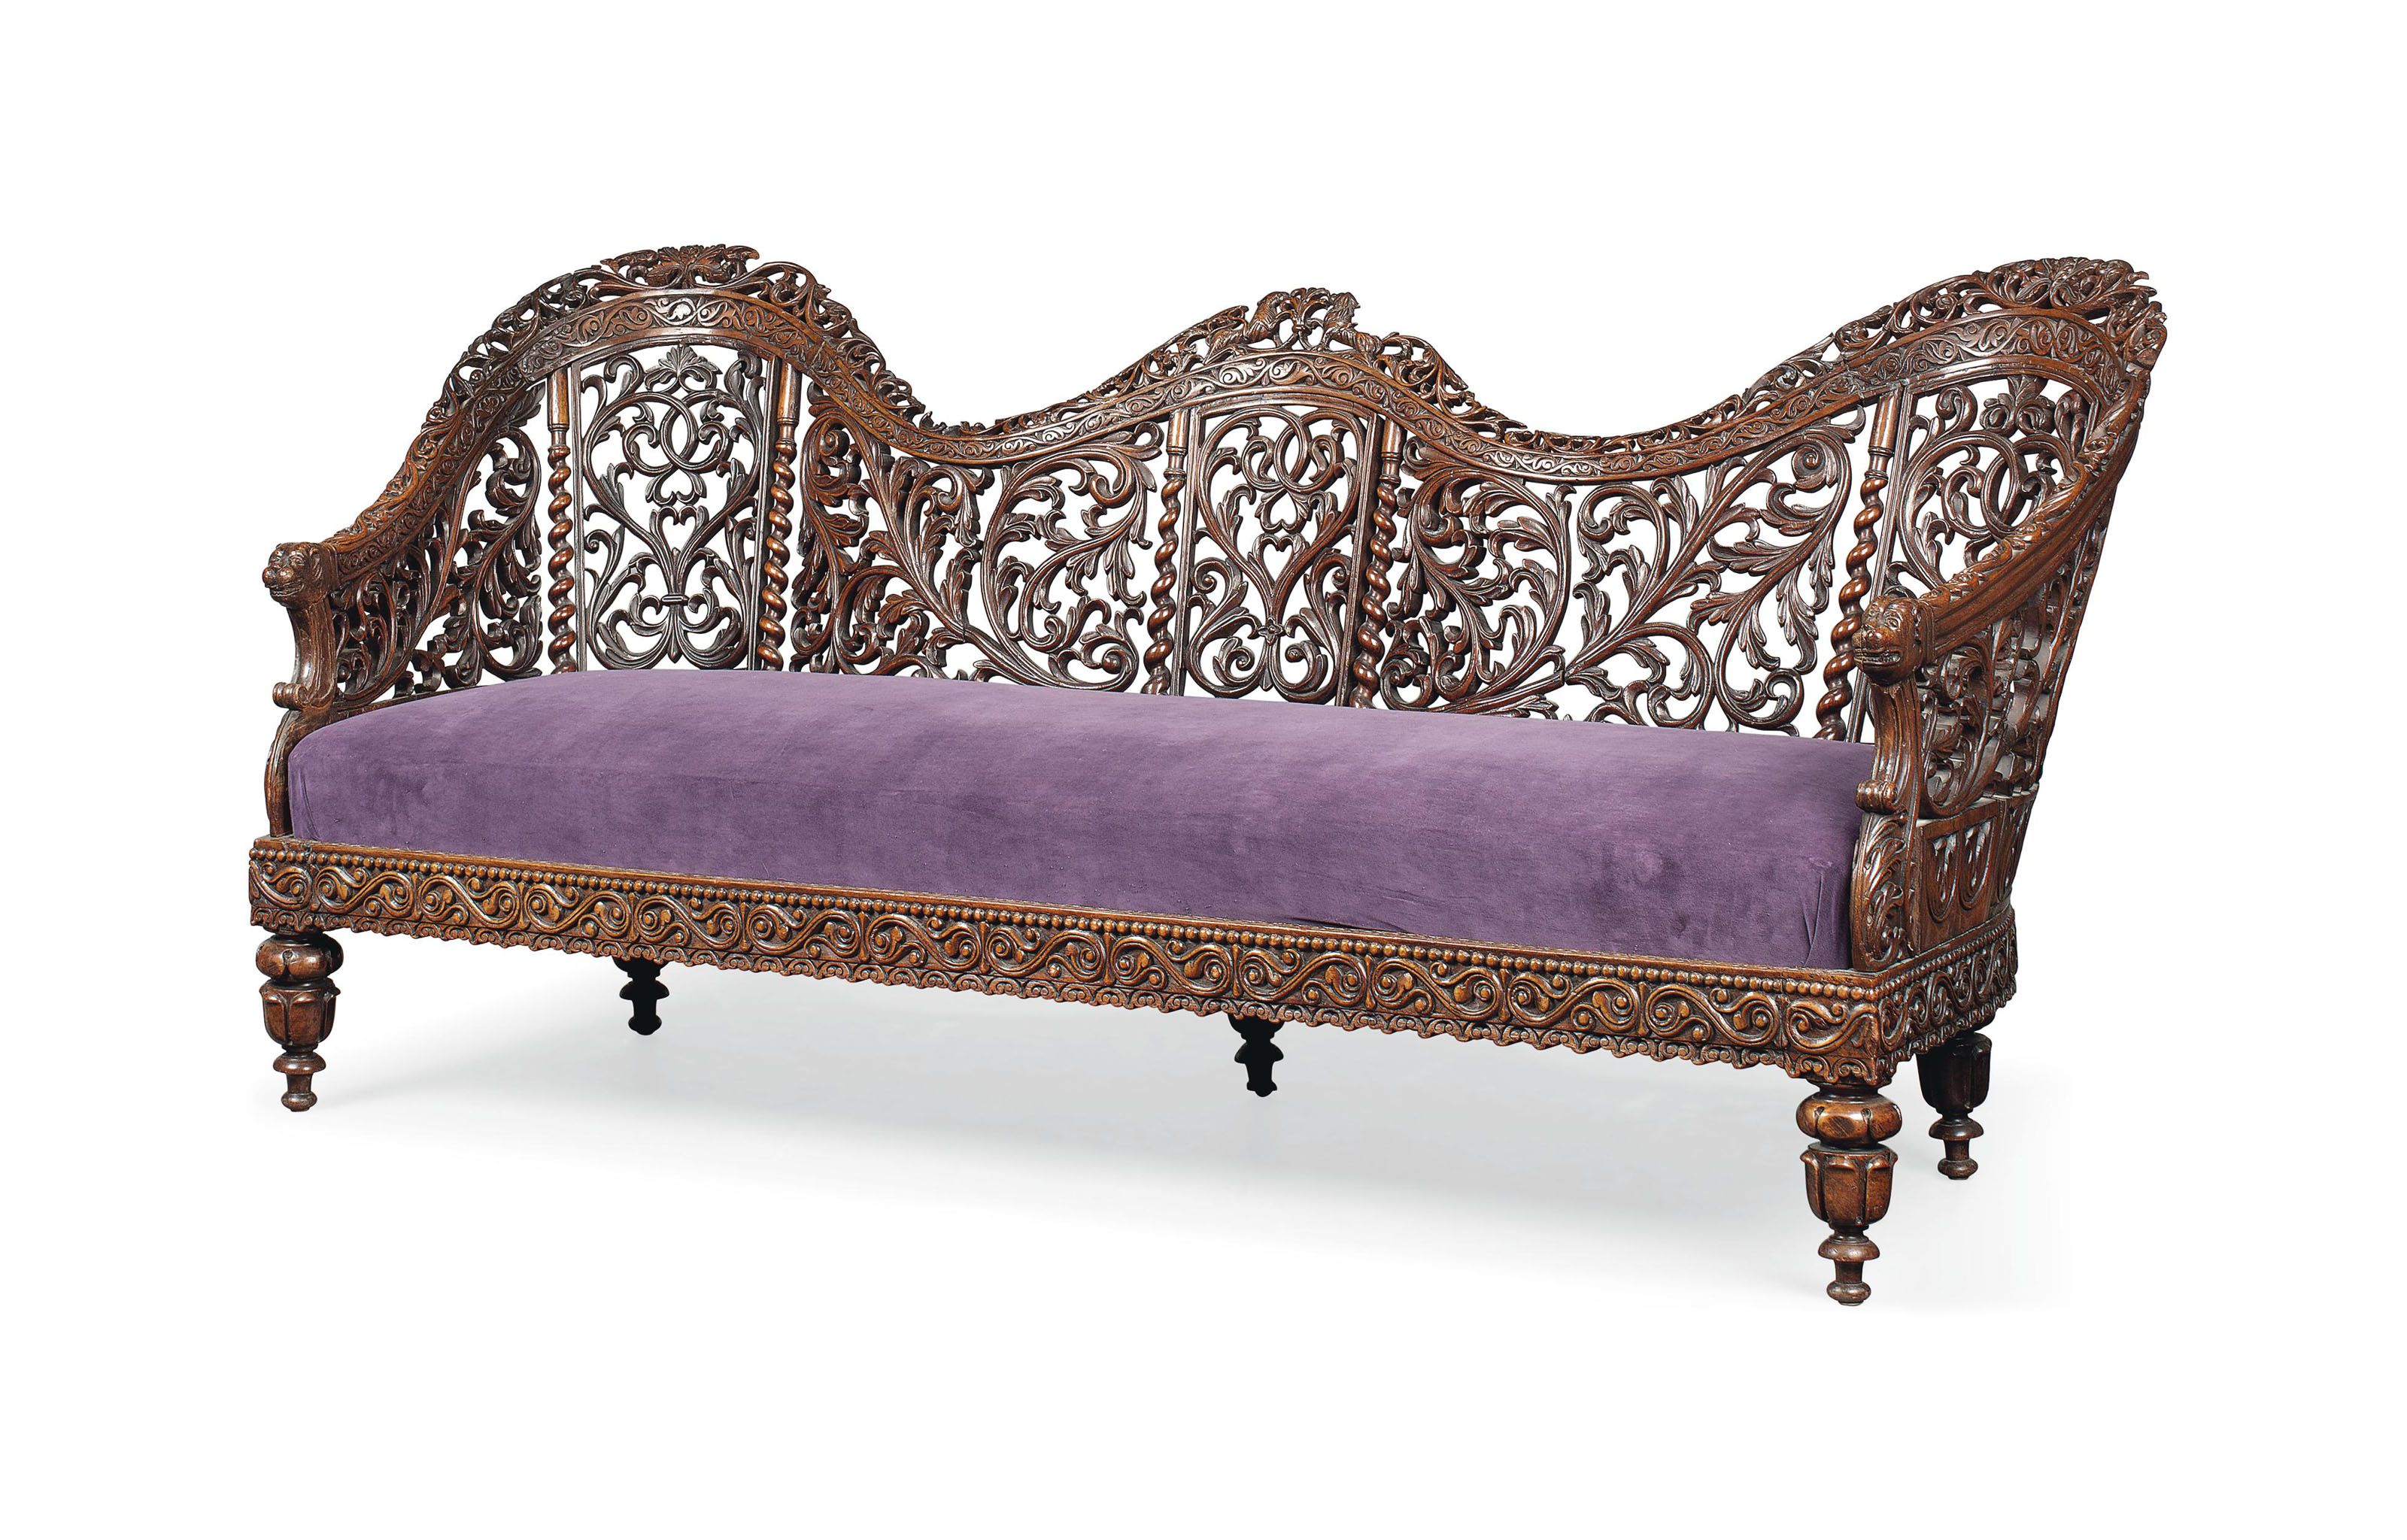 An Anglo Indian Carved Teak Sofa | Third Quarter 19th Century | Sofa In London Optical Sofa Chairs (View 12 of 25)